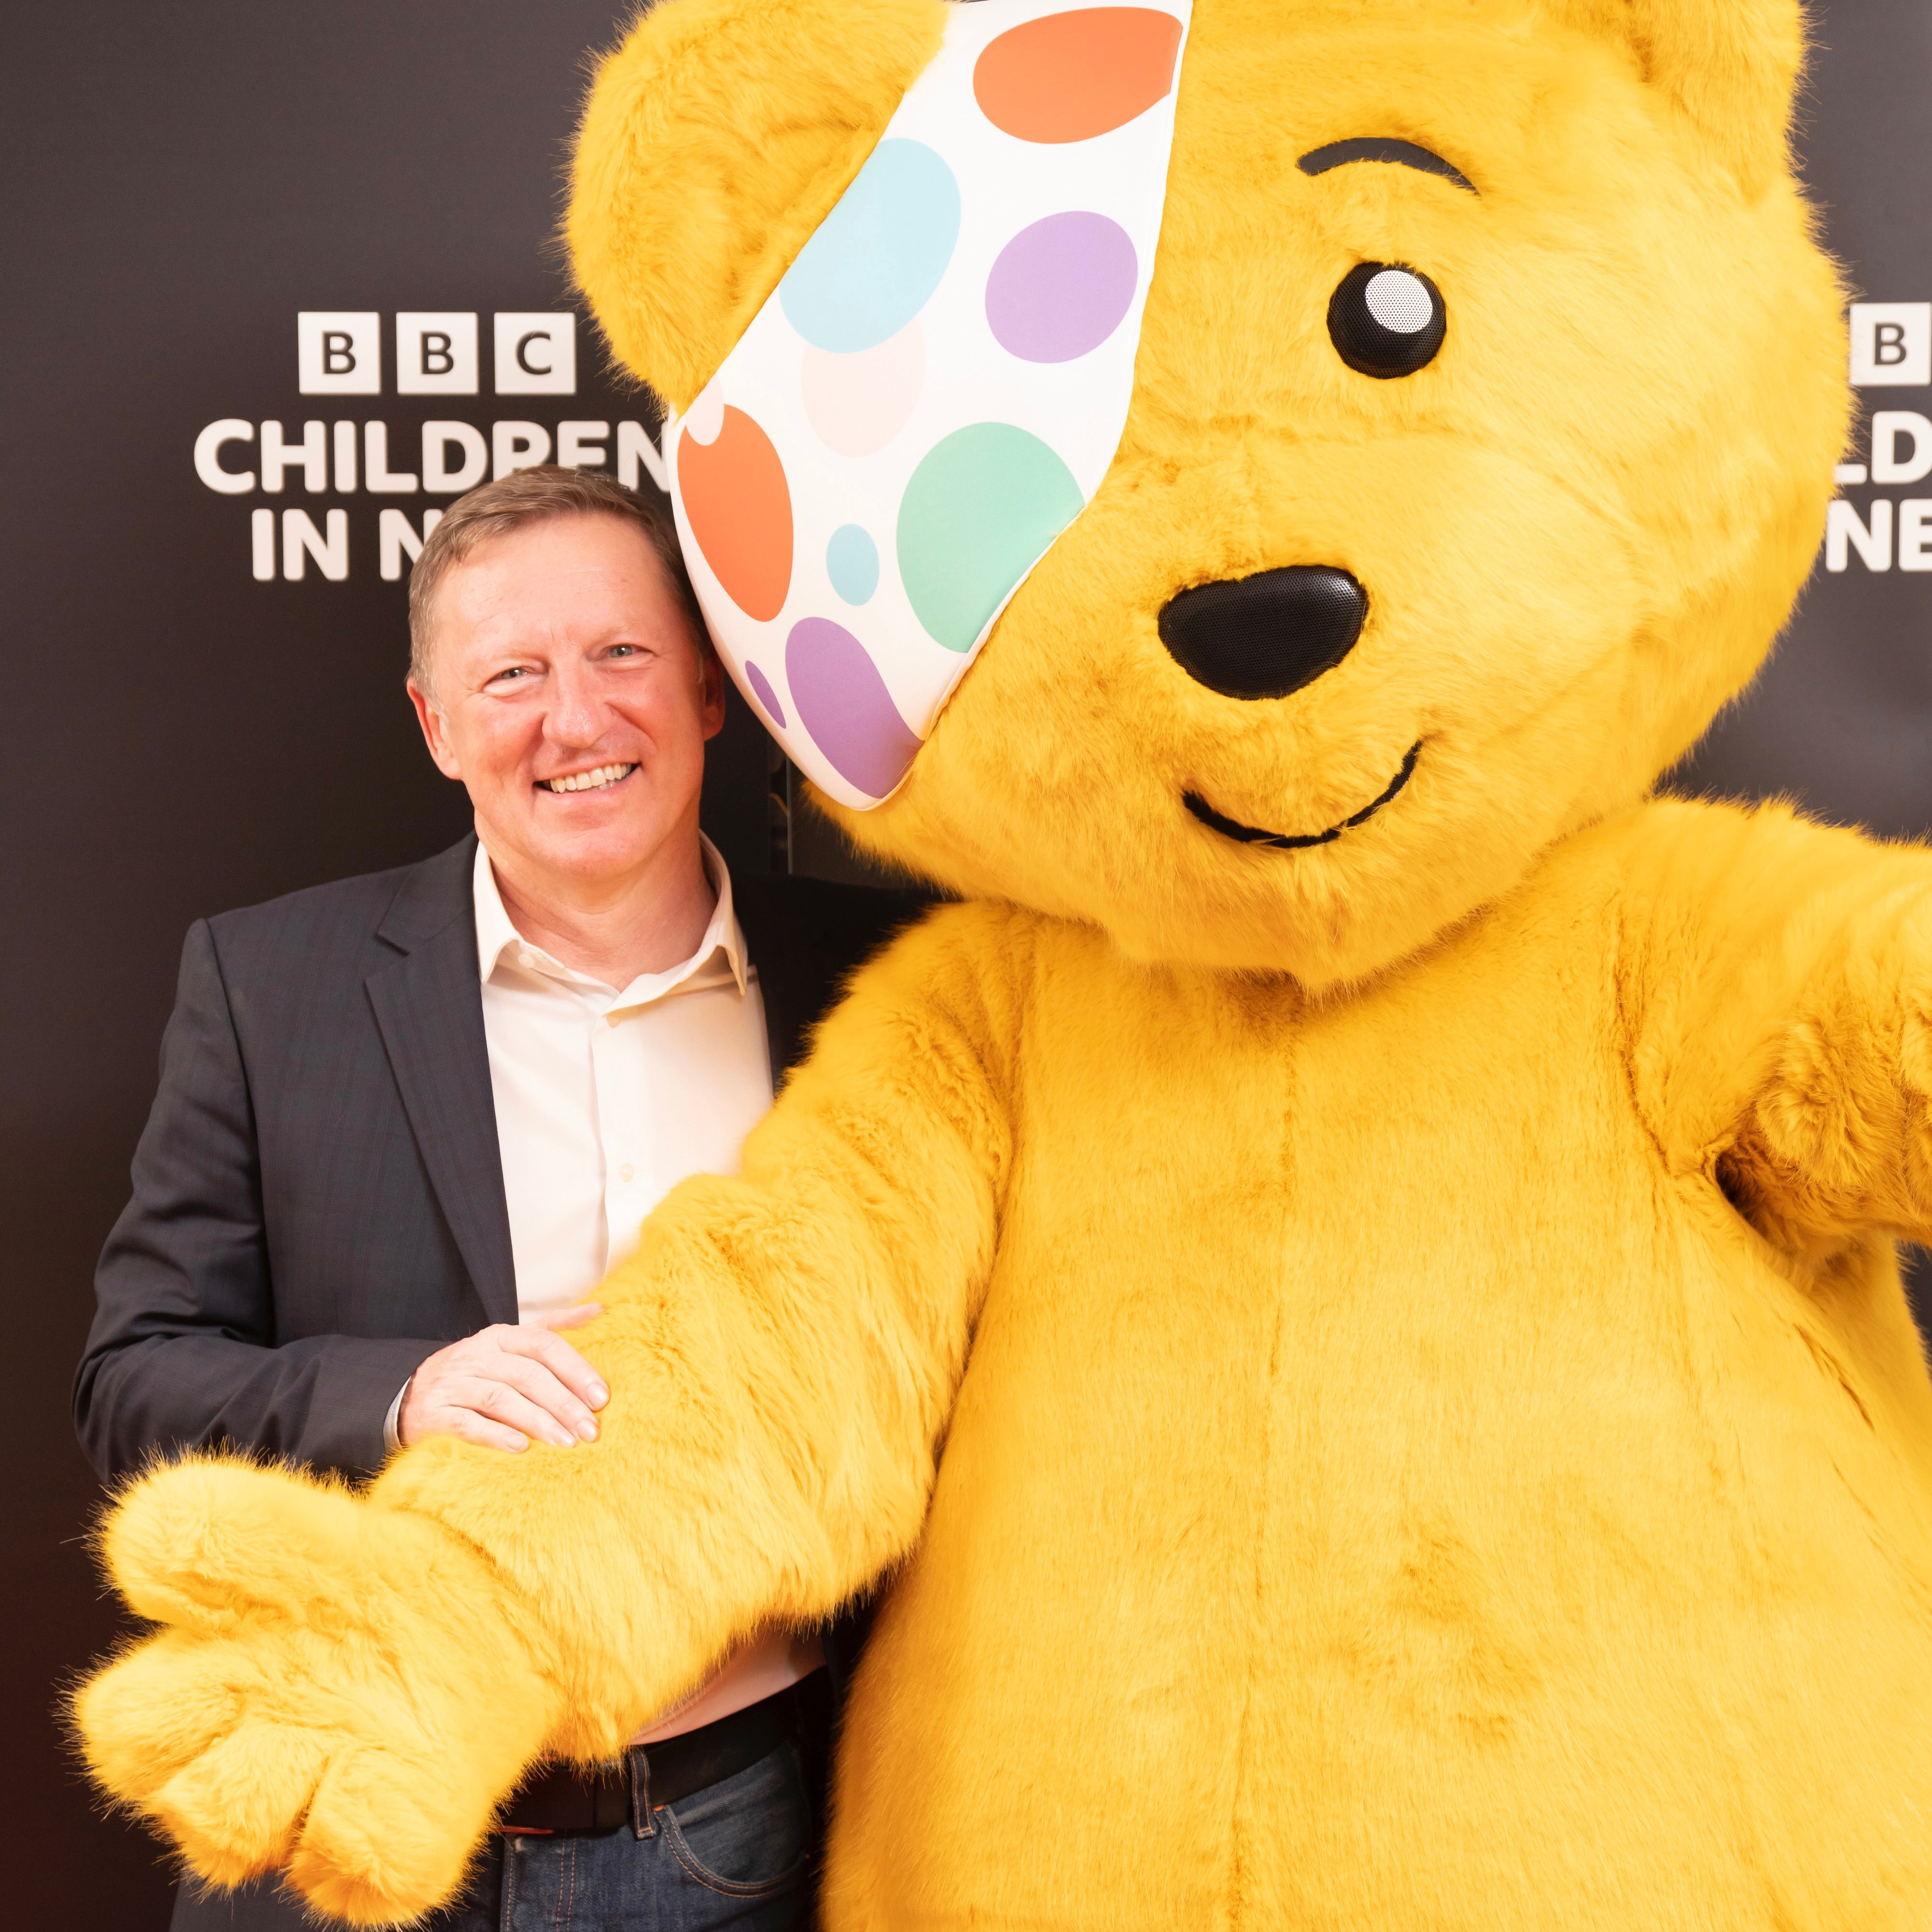 A Word From BBC CHILDREN IN NEED